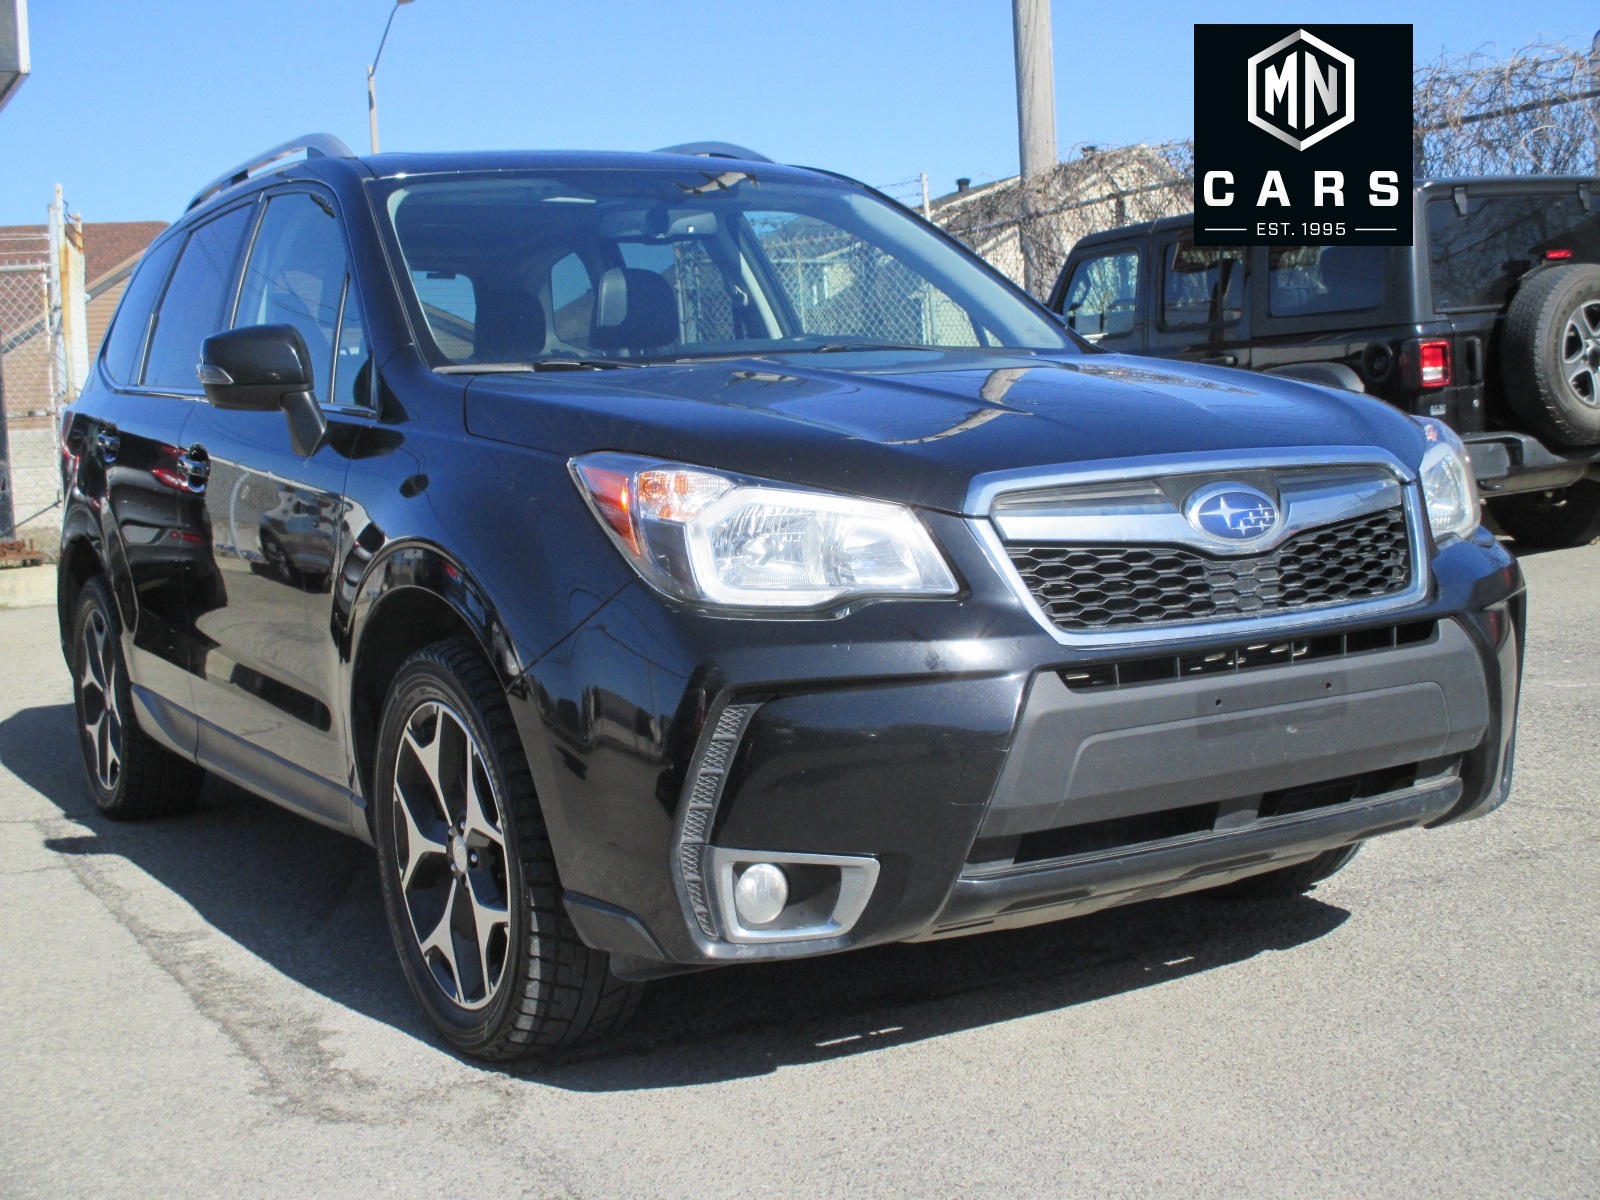 2016 Subaru Forester 5dr Wgn CVT 2.0XT Touring ACCIDENT FREE